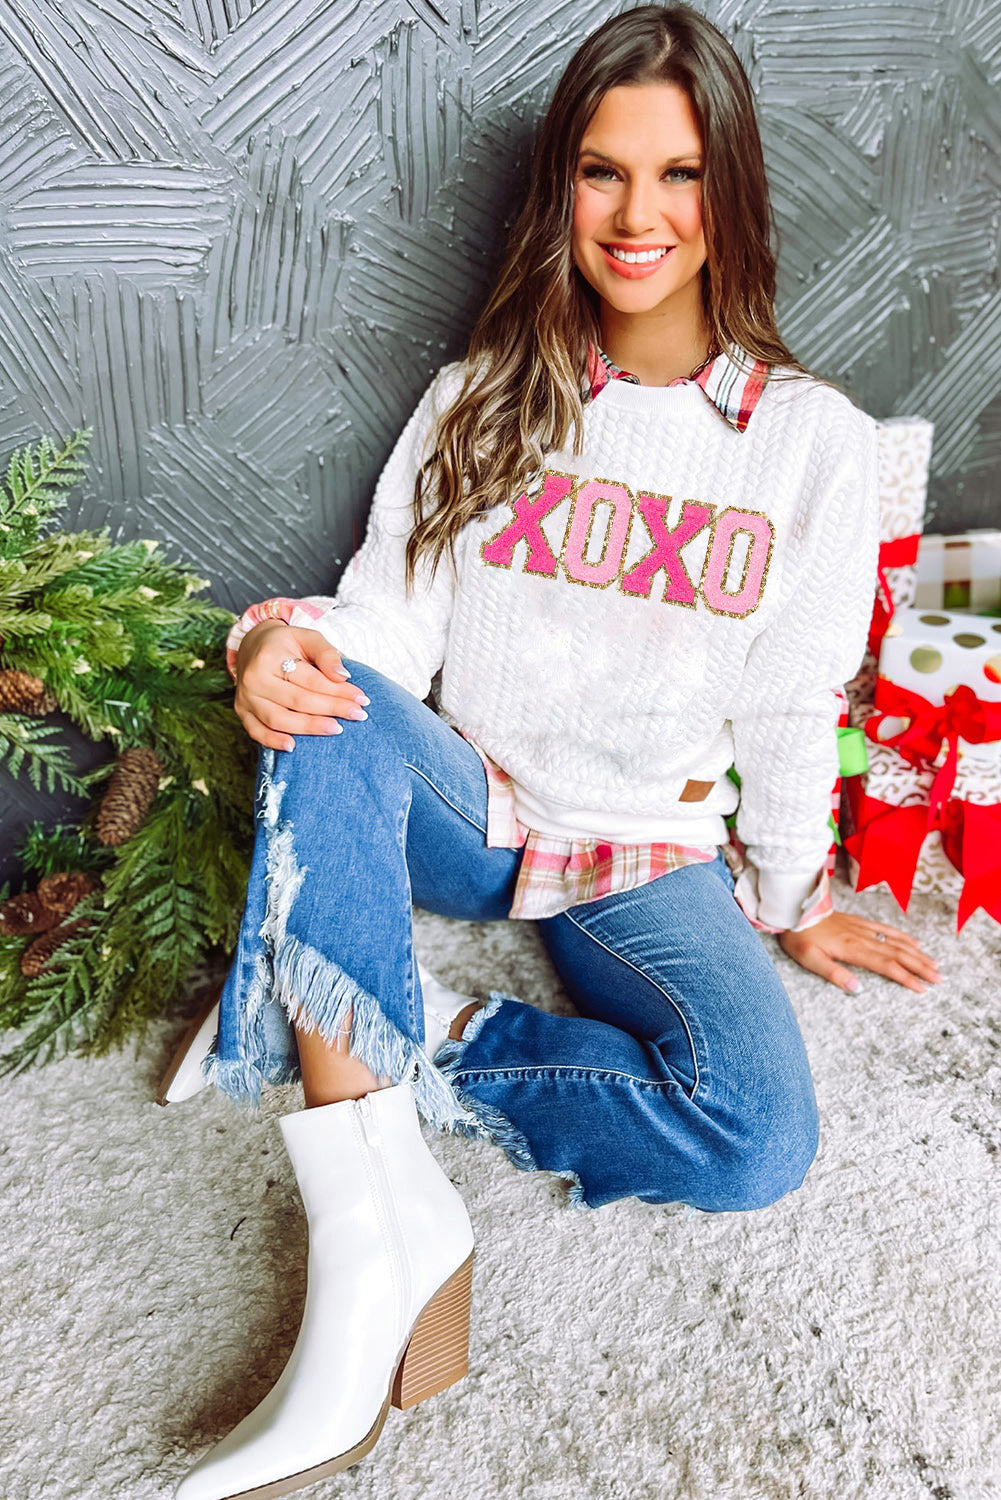 Racing Red Heart XOXO Chenille Embroidered Textured Sweatshirt